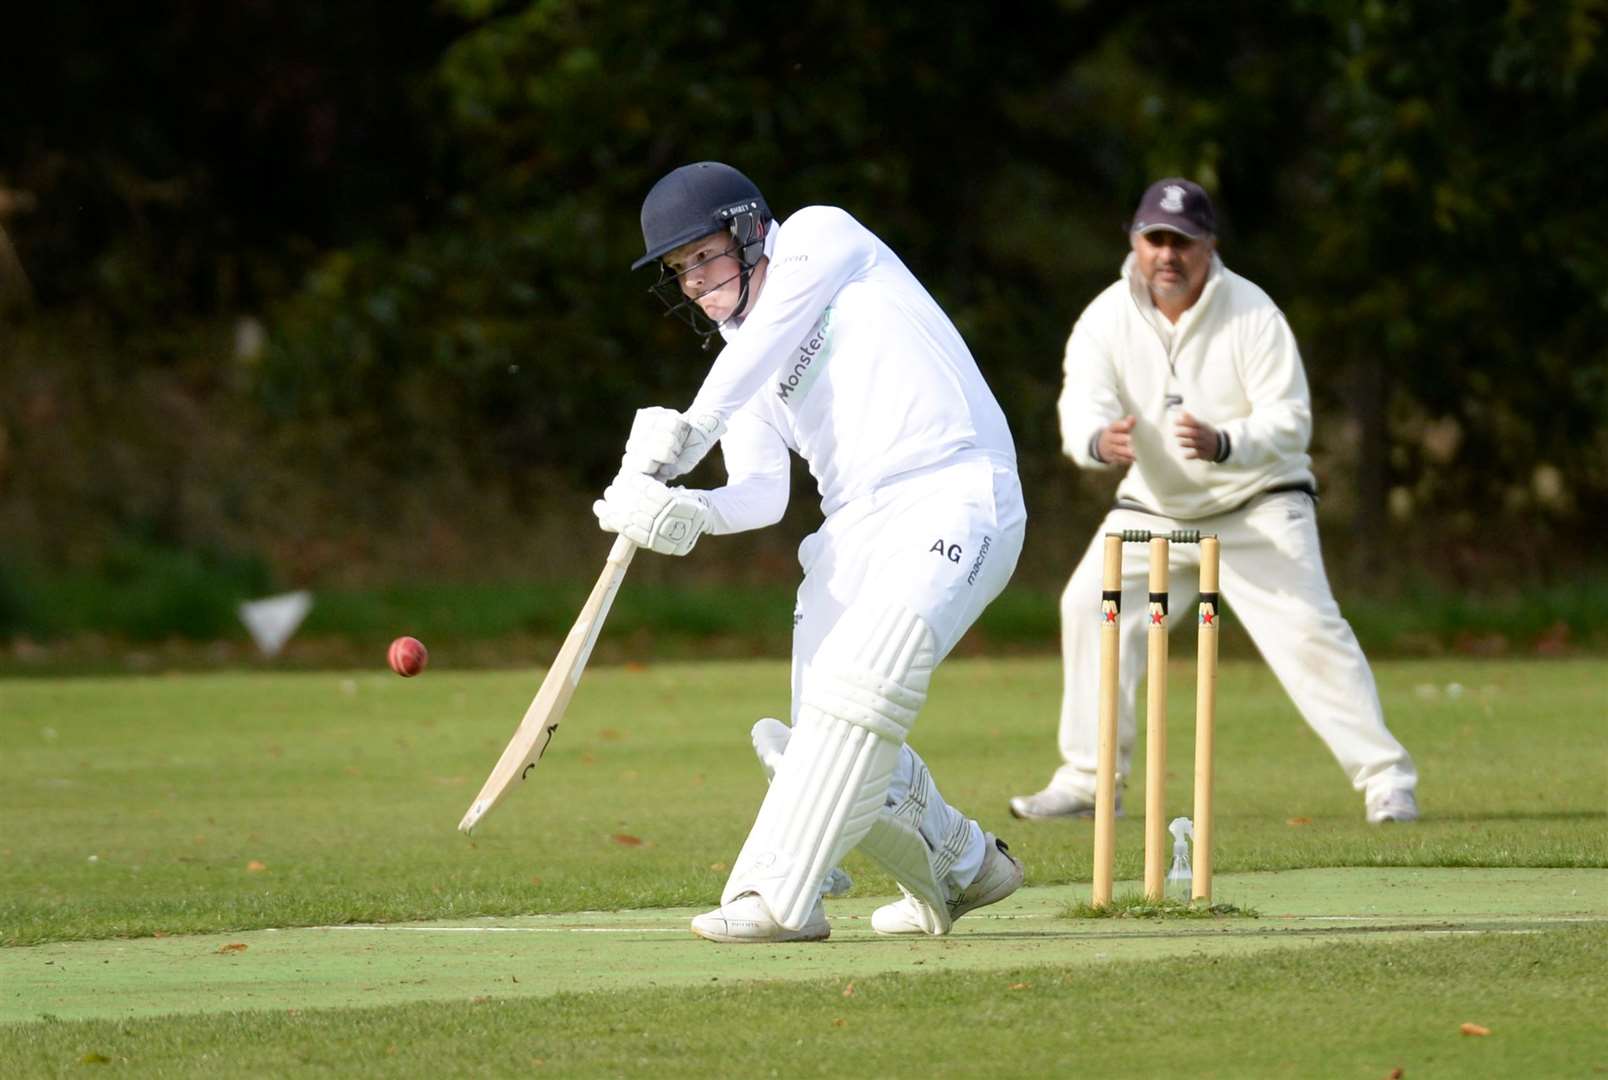 Alex Green starred with the bat for Northern Counties. Picture: James Mackenzie